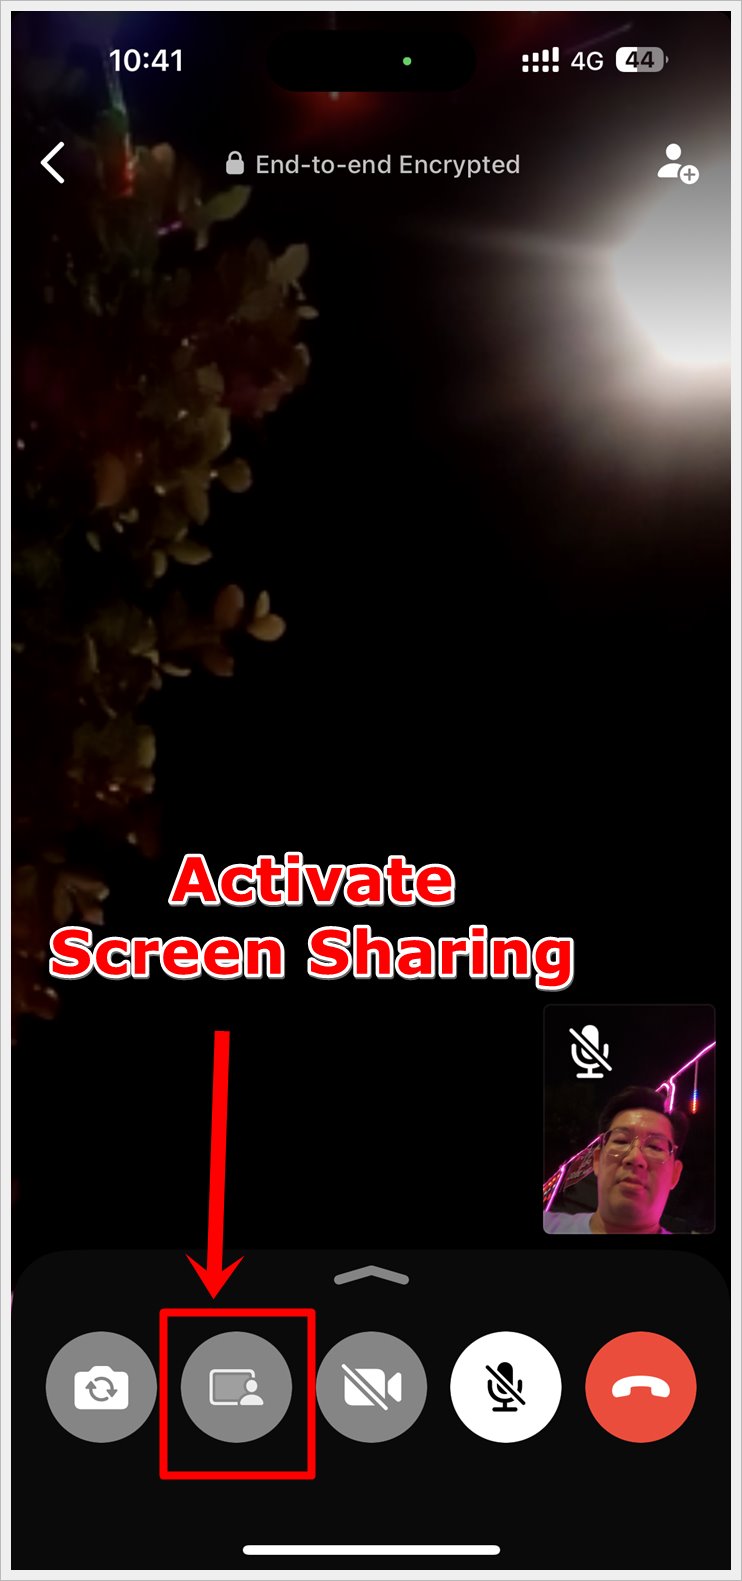 Screenshot from an iPhone displaying a WhatsApp video call window, with the 'Screen Sharing' icon highlighted to indicate the option to enable screen sharing with the contact.